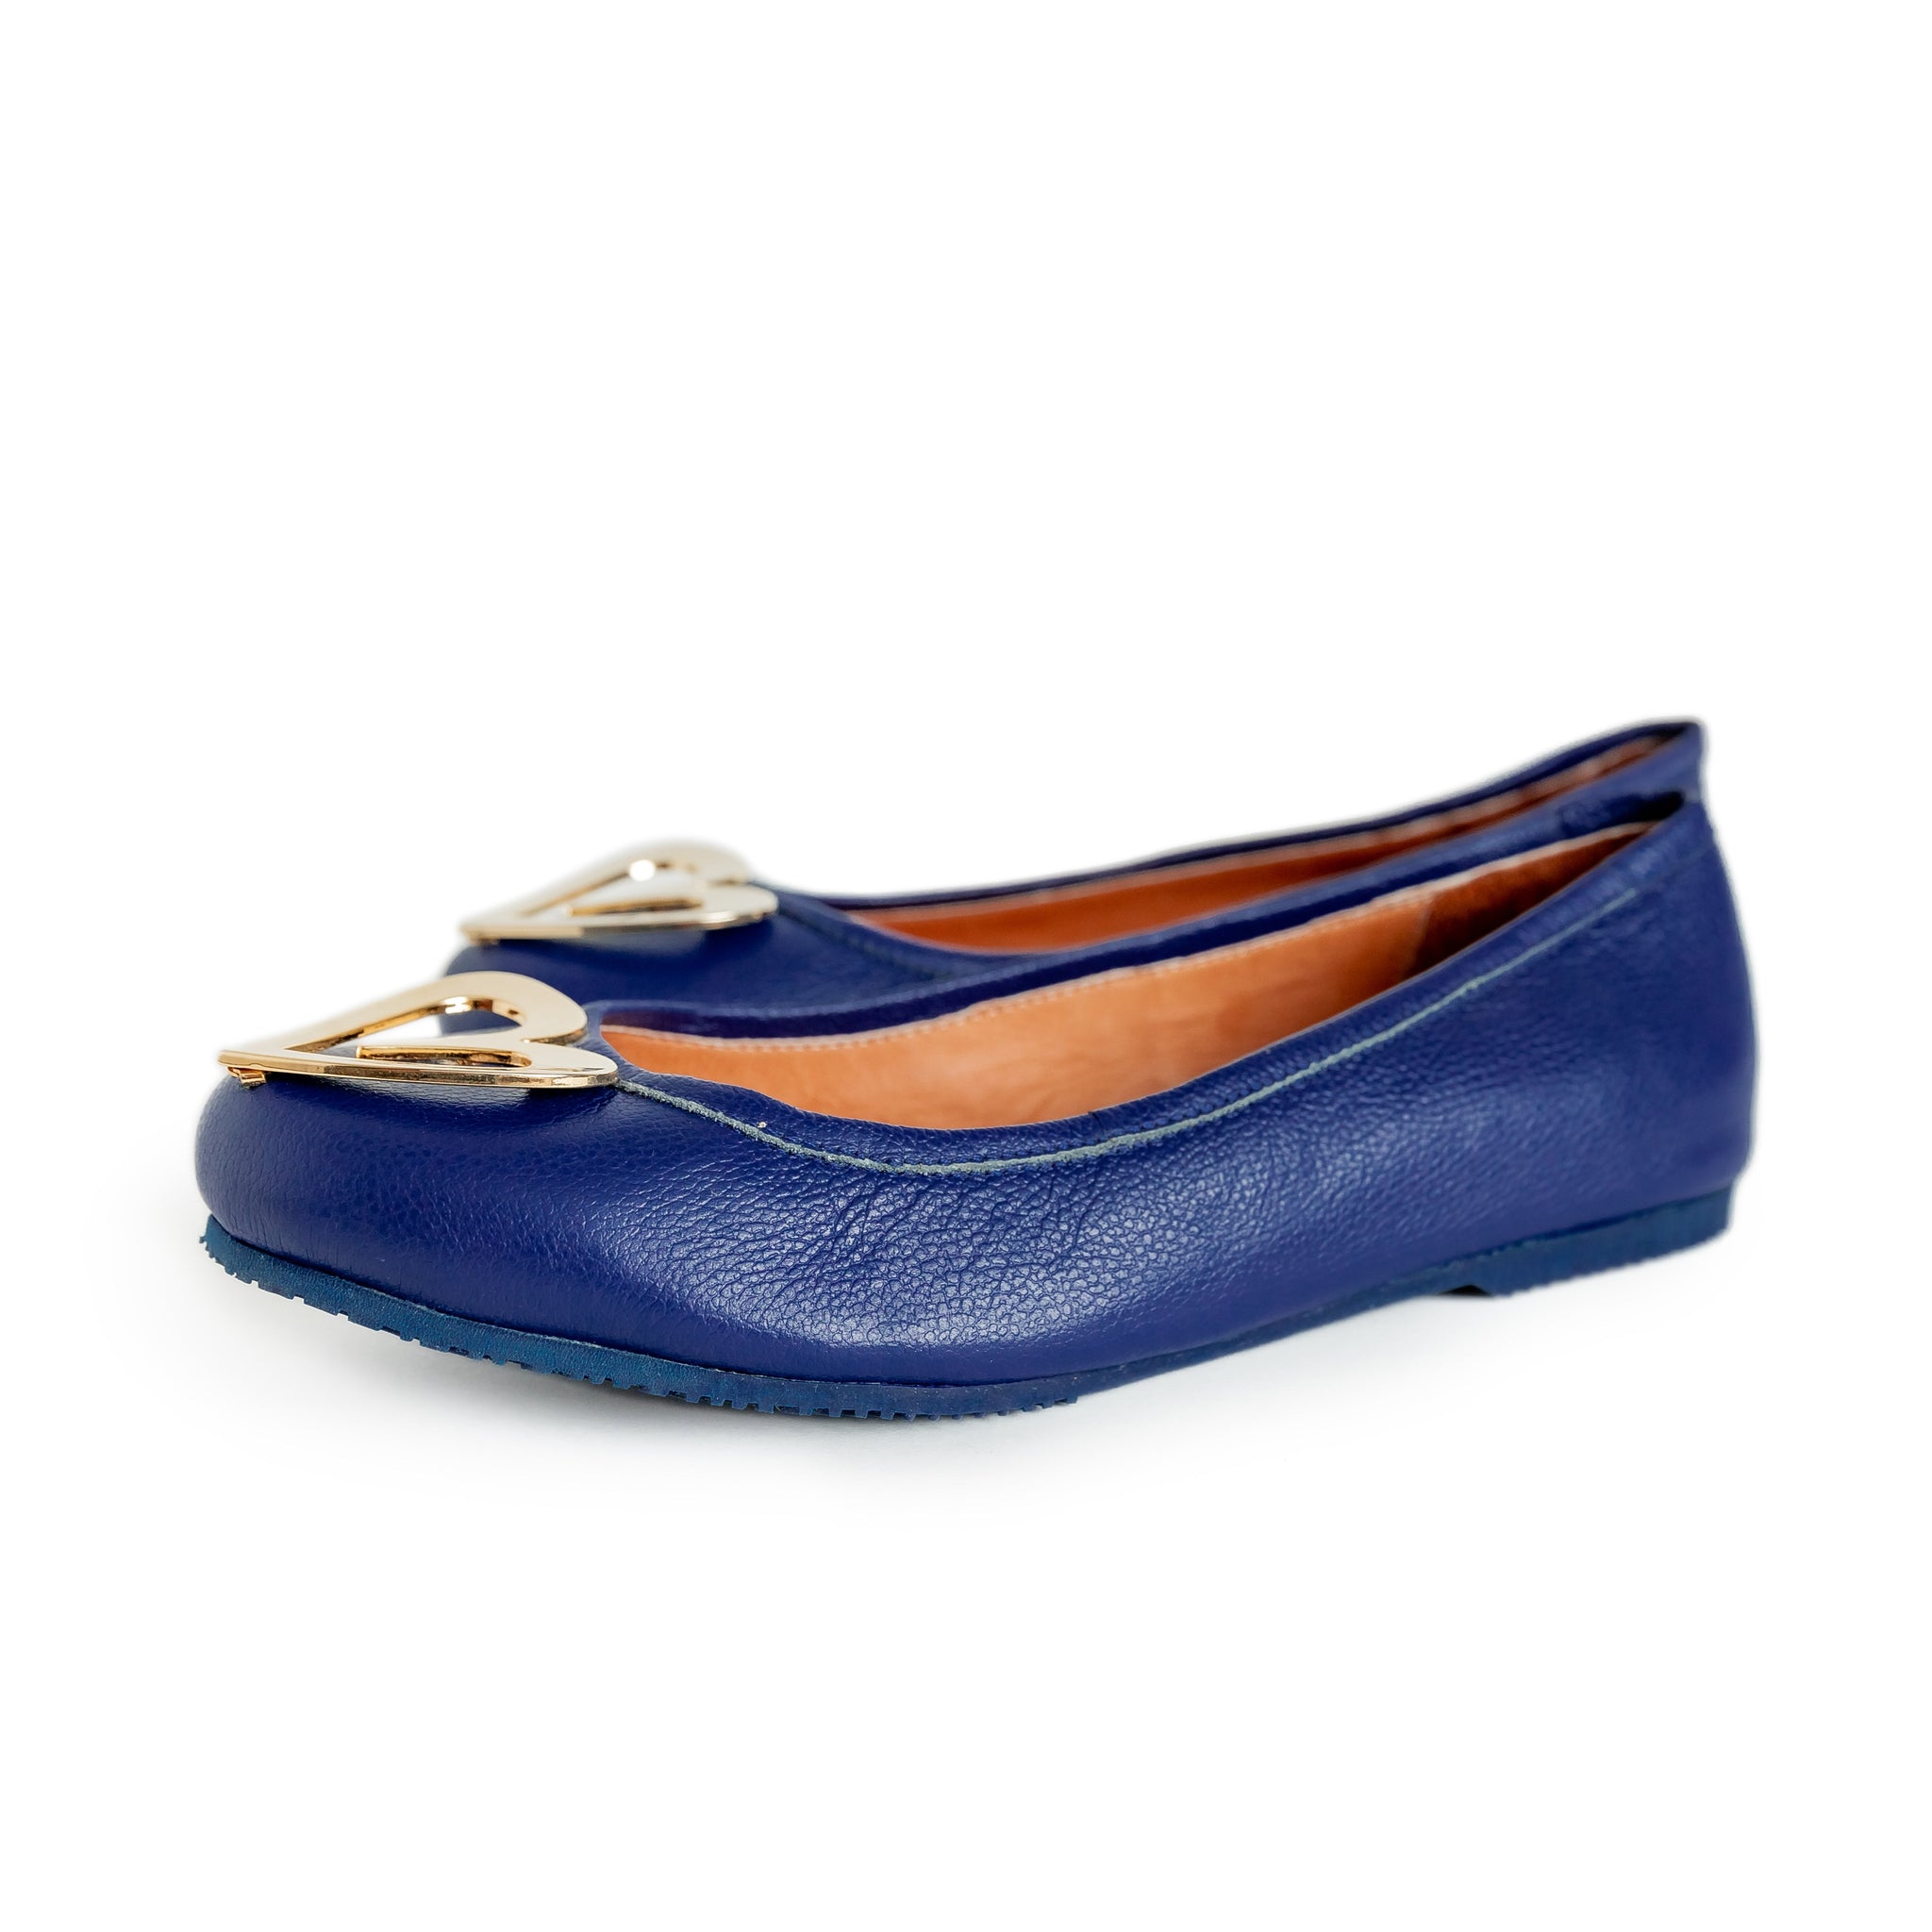 Ballerina Pipa Blue by Nataly Mendez. Leather upper material Leather insole lining Heel height .5 cm Handmade